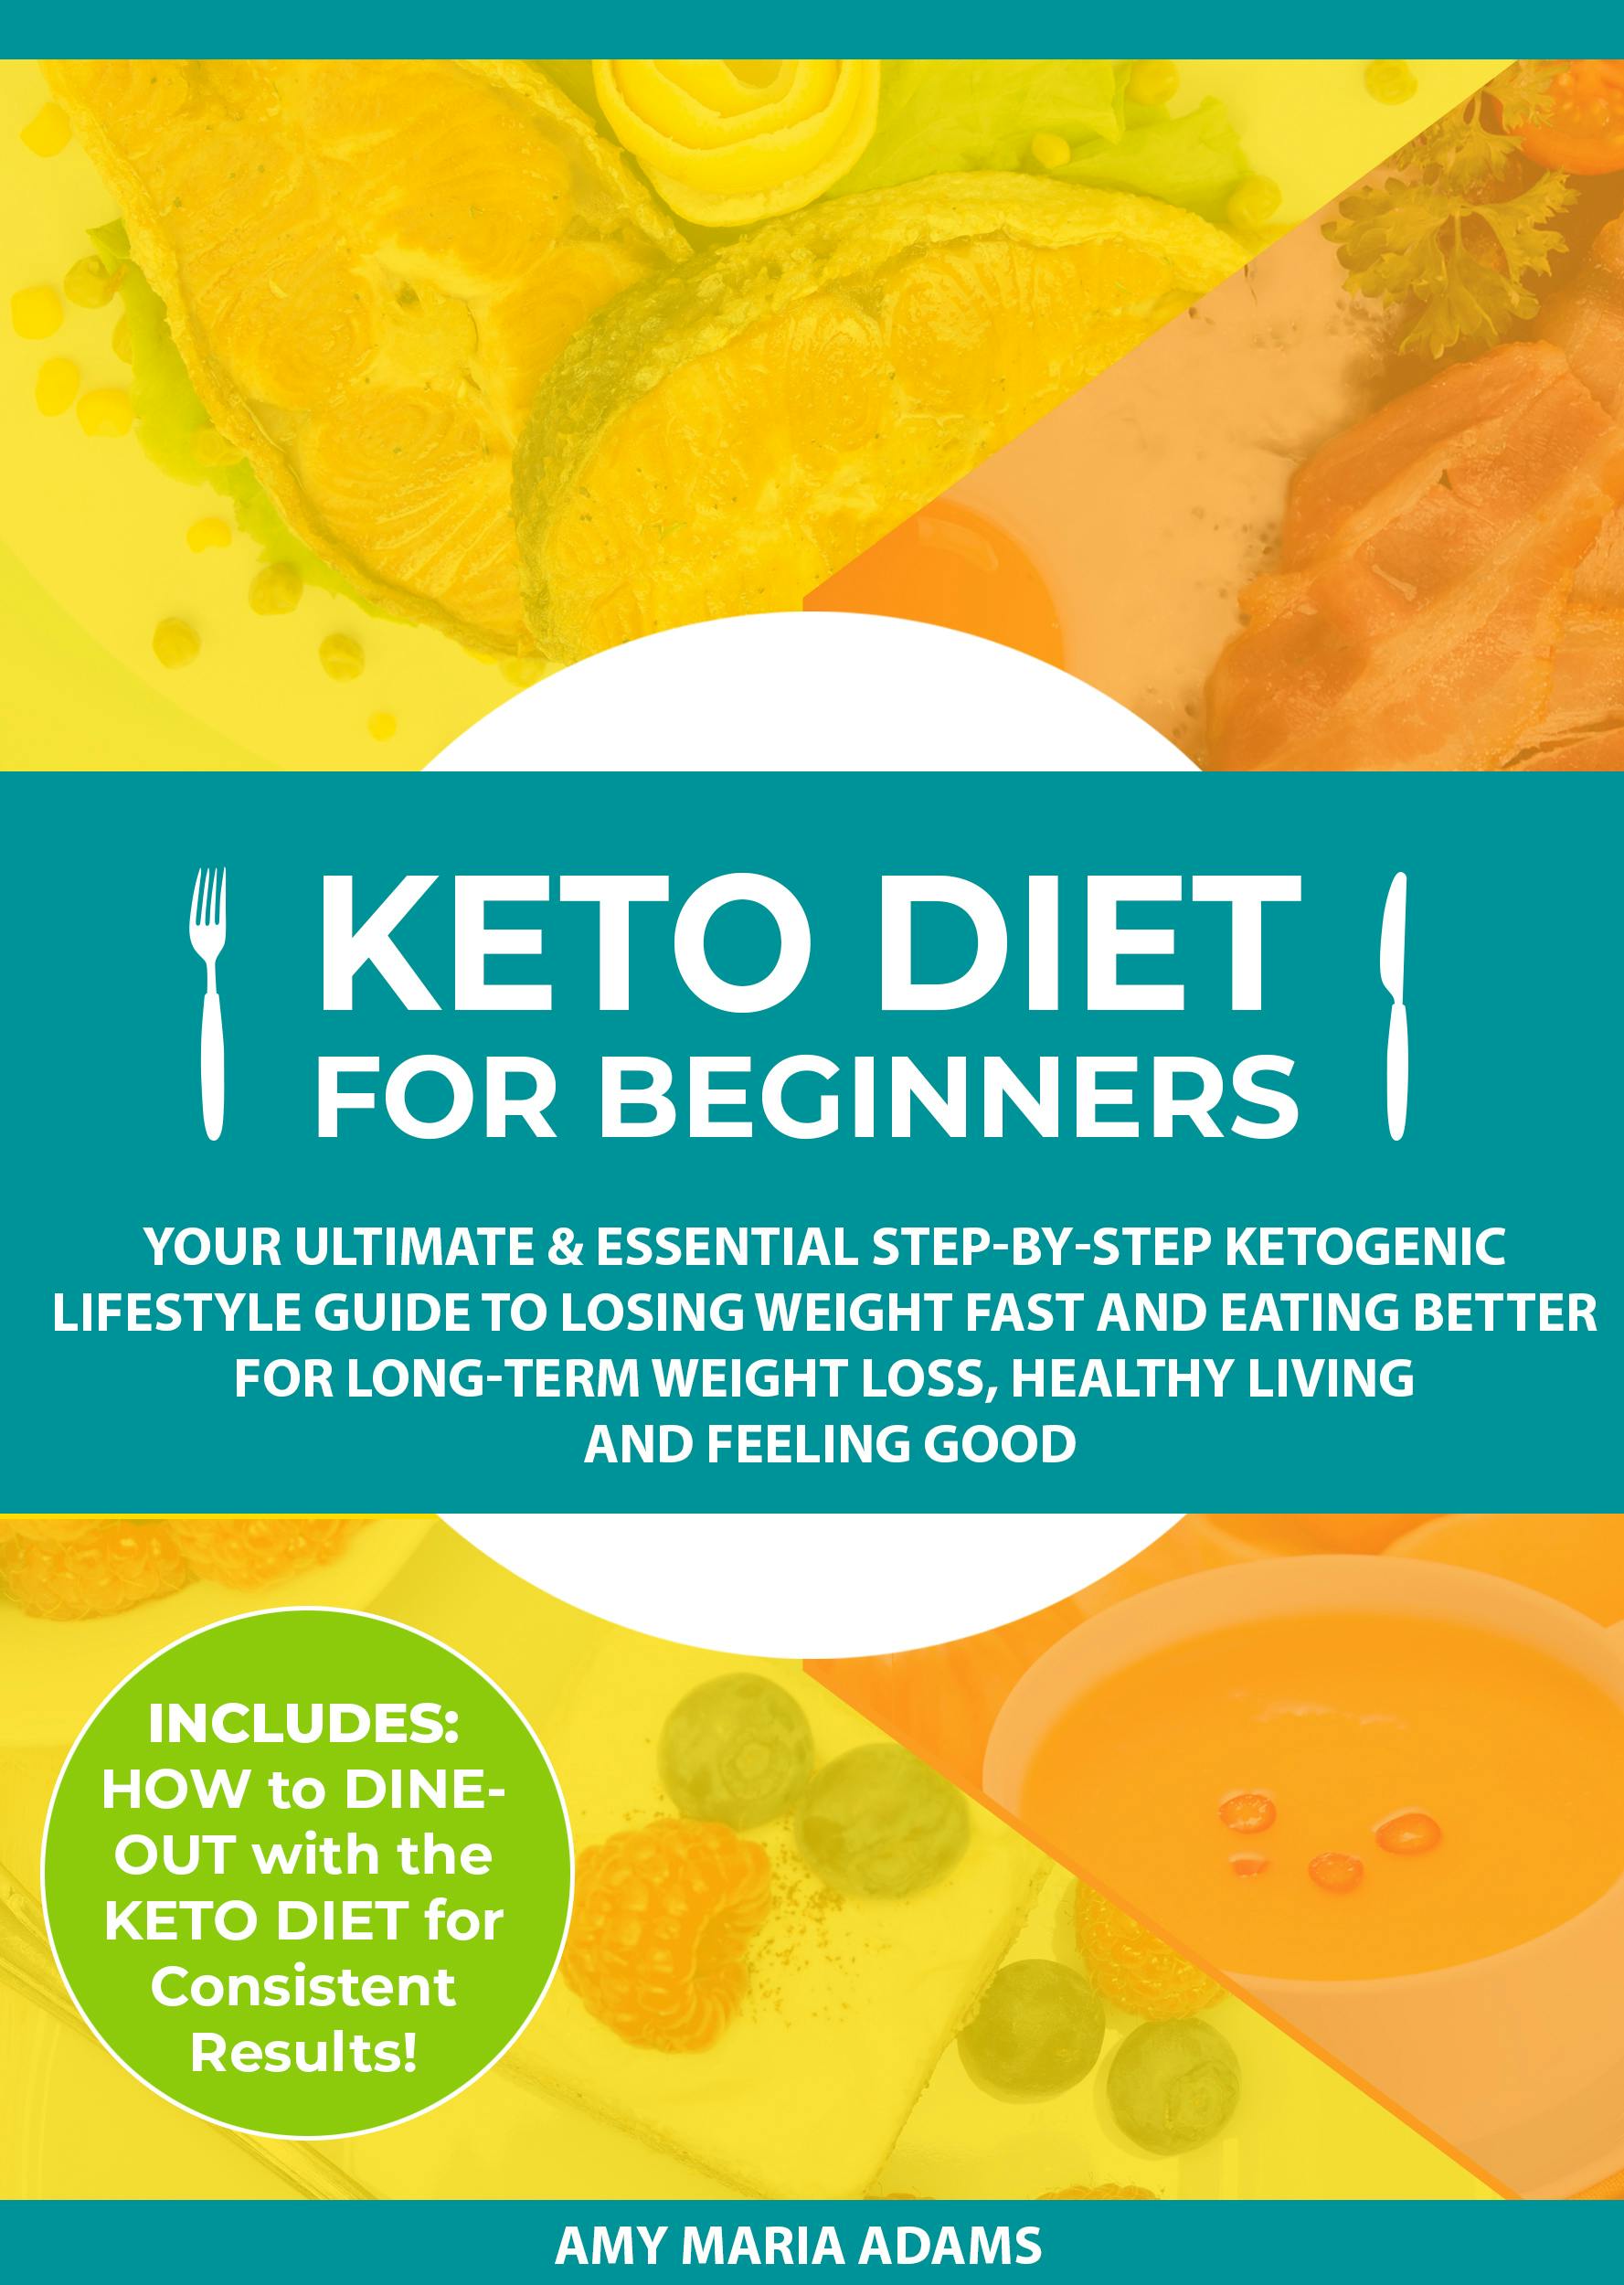 Keto Diet for Beginners - Amy Maria Adams